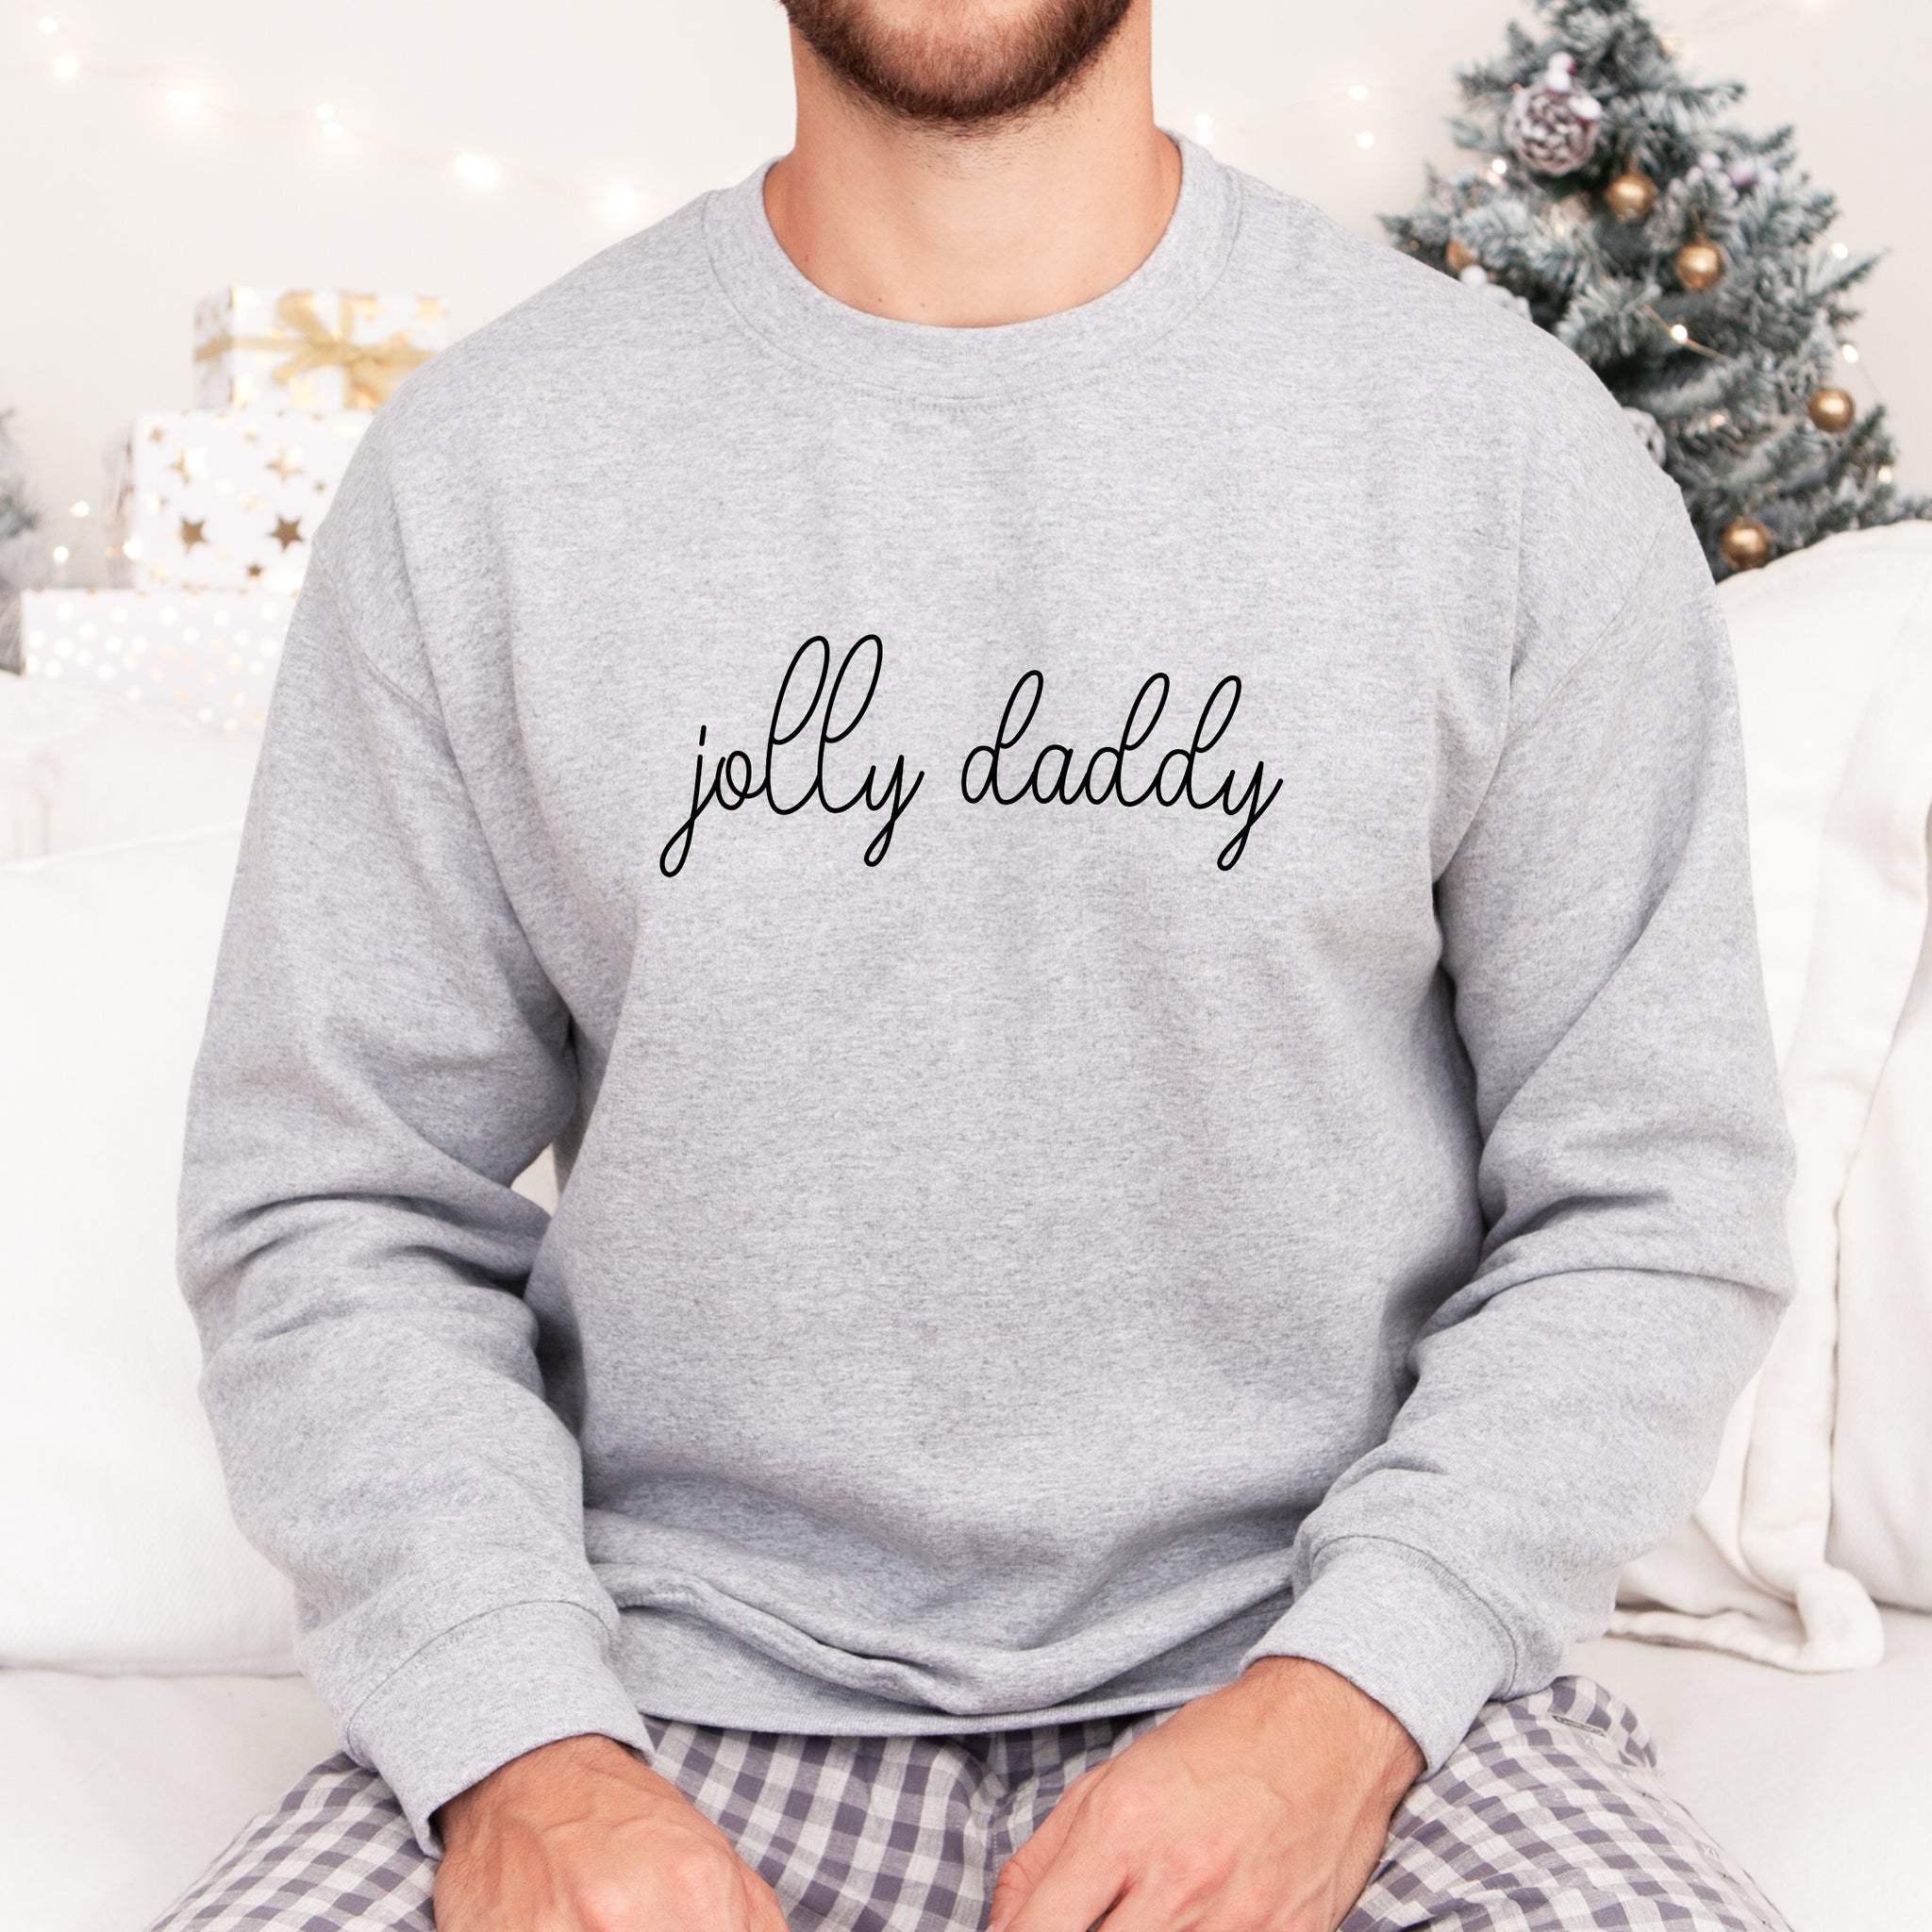 Jolly mommy/daddy - Sweat-shirt unisexe à col rond unisexe